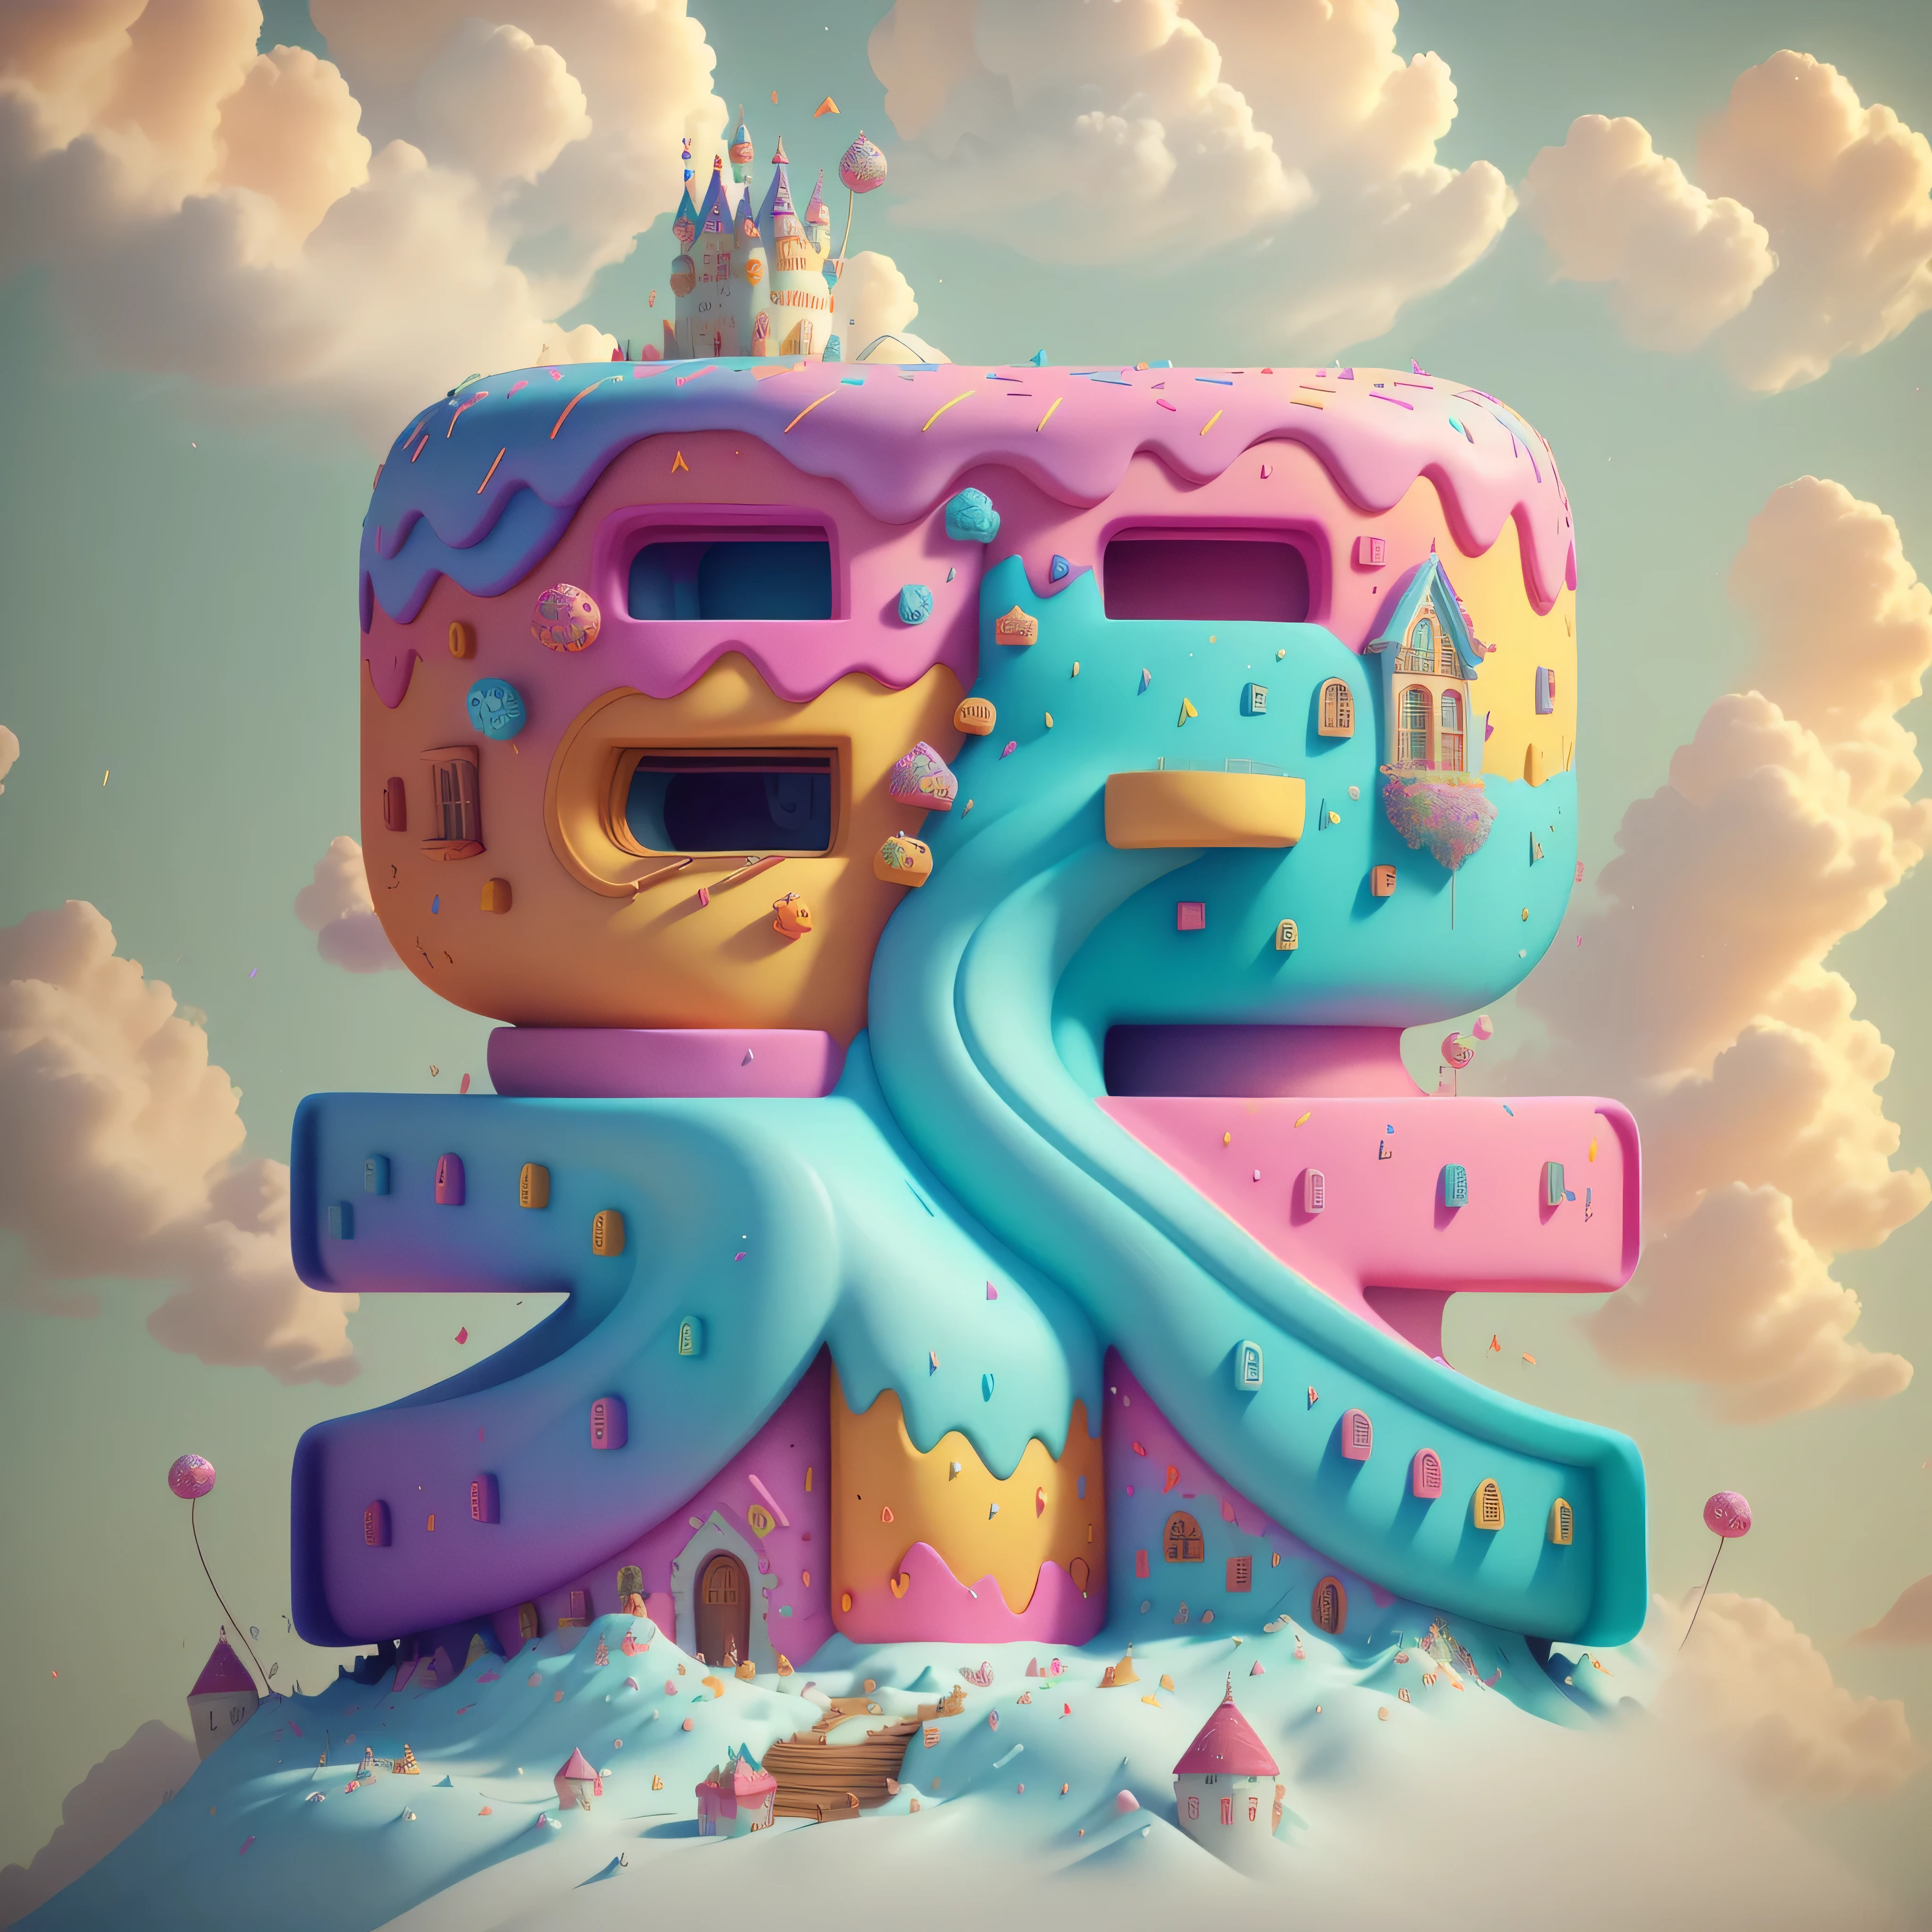 (F/2.4:1.2) (charming:1.3) (happiness:1.2) (colorful:1.2) (Energetic:1.2) (vivid:1.2) (a Funny crooked castle 🏰 made with donuts:1.3) (lollipop:1.2) (tilt:1.2) (Sweet) (masterpiece) (cartoony lighting) (Toon shading:1.2) (Wallpaper phone) (Ultra high detail) (Unreal Engine 5) (confetti:1.3) (soft cartoon cloud:1.2)